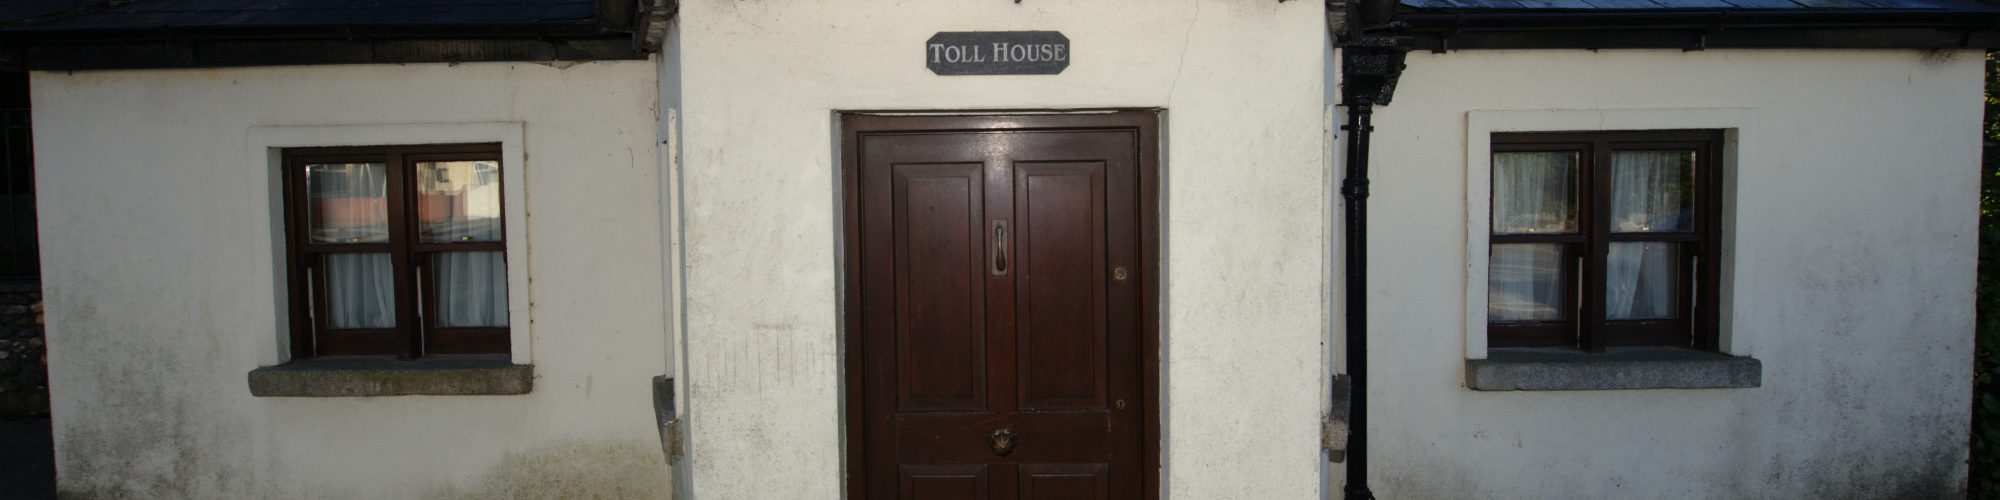 Toll House on the Blessington Village Heritage Trail